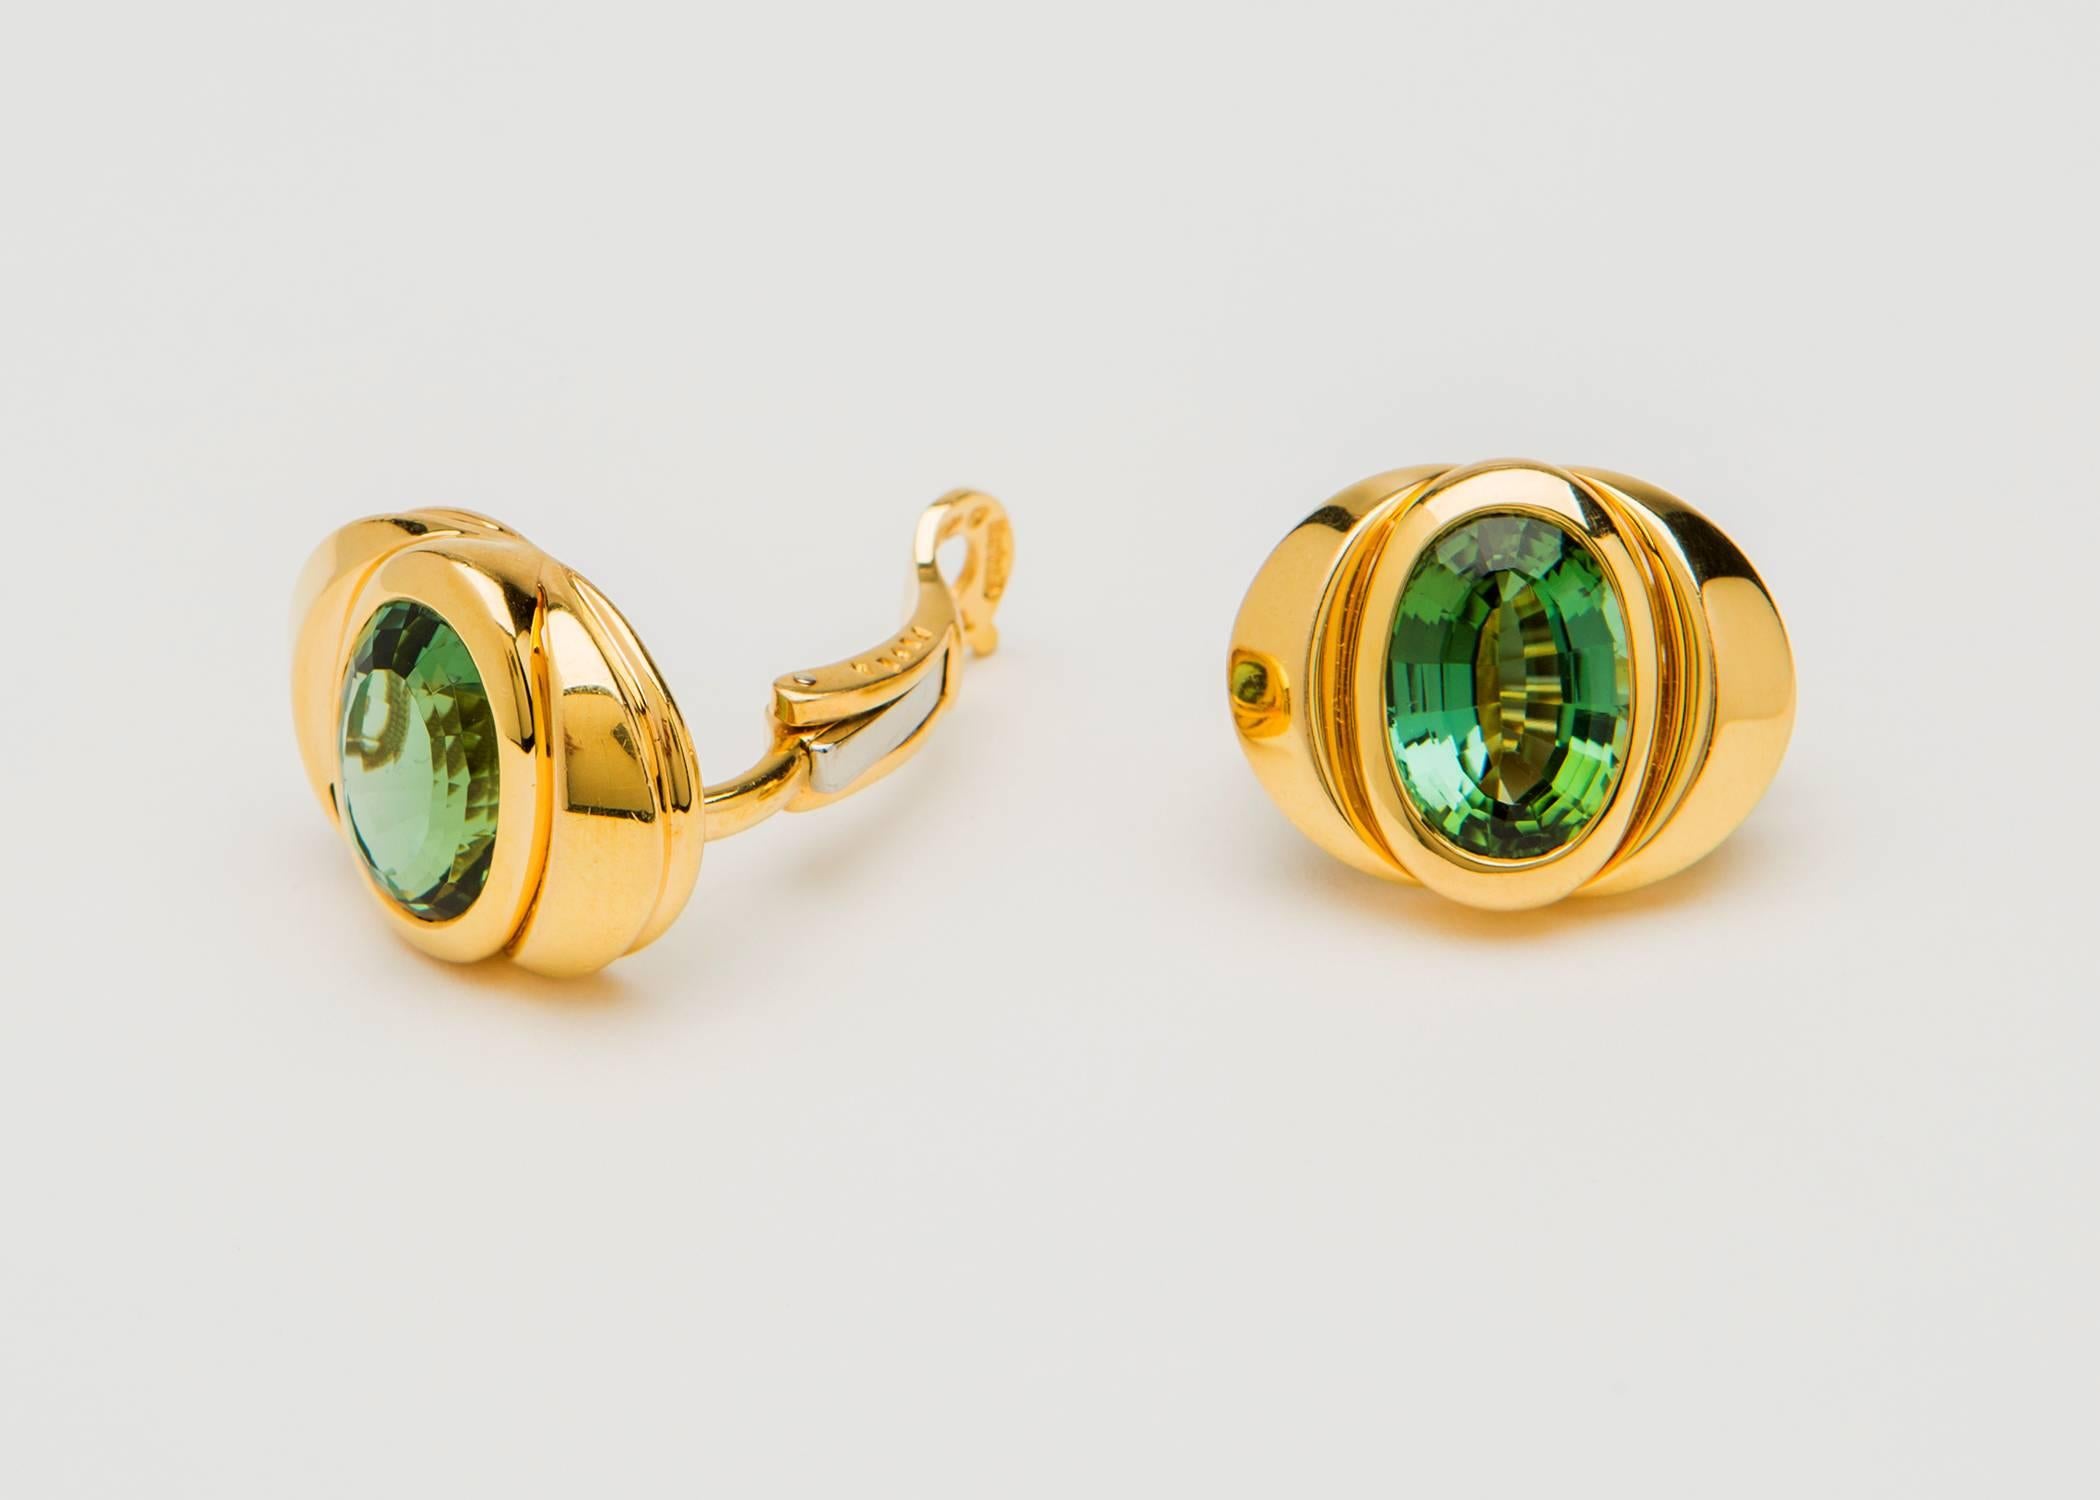 This is an extremely fine matched pair of green tourmalines. They exhibit great saturation of color and excellent cutting. The Iconic designer Marina B has set them in simple mountings with dramatic architectural shape and lines. Please view the